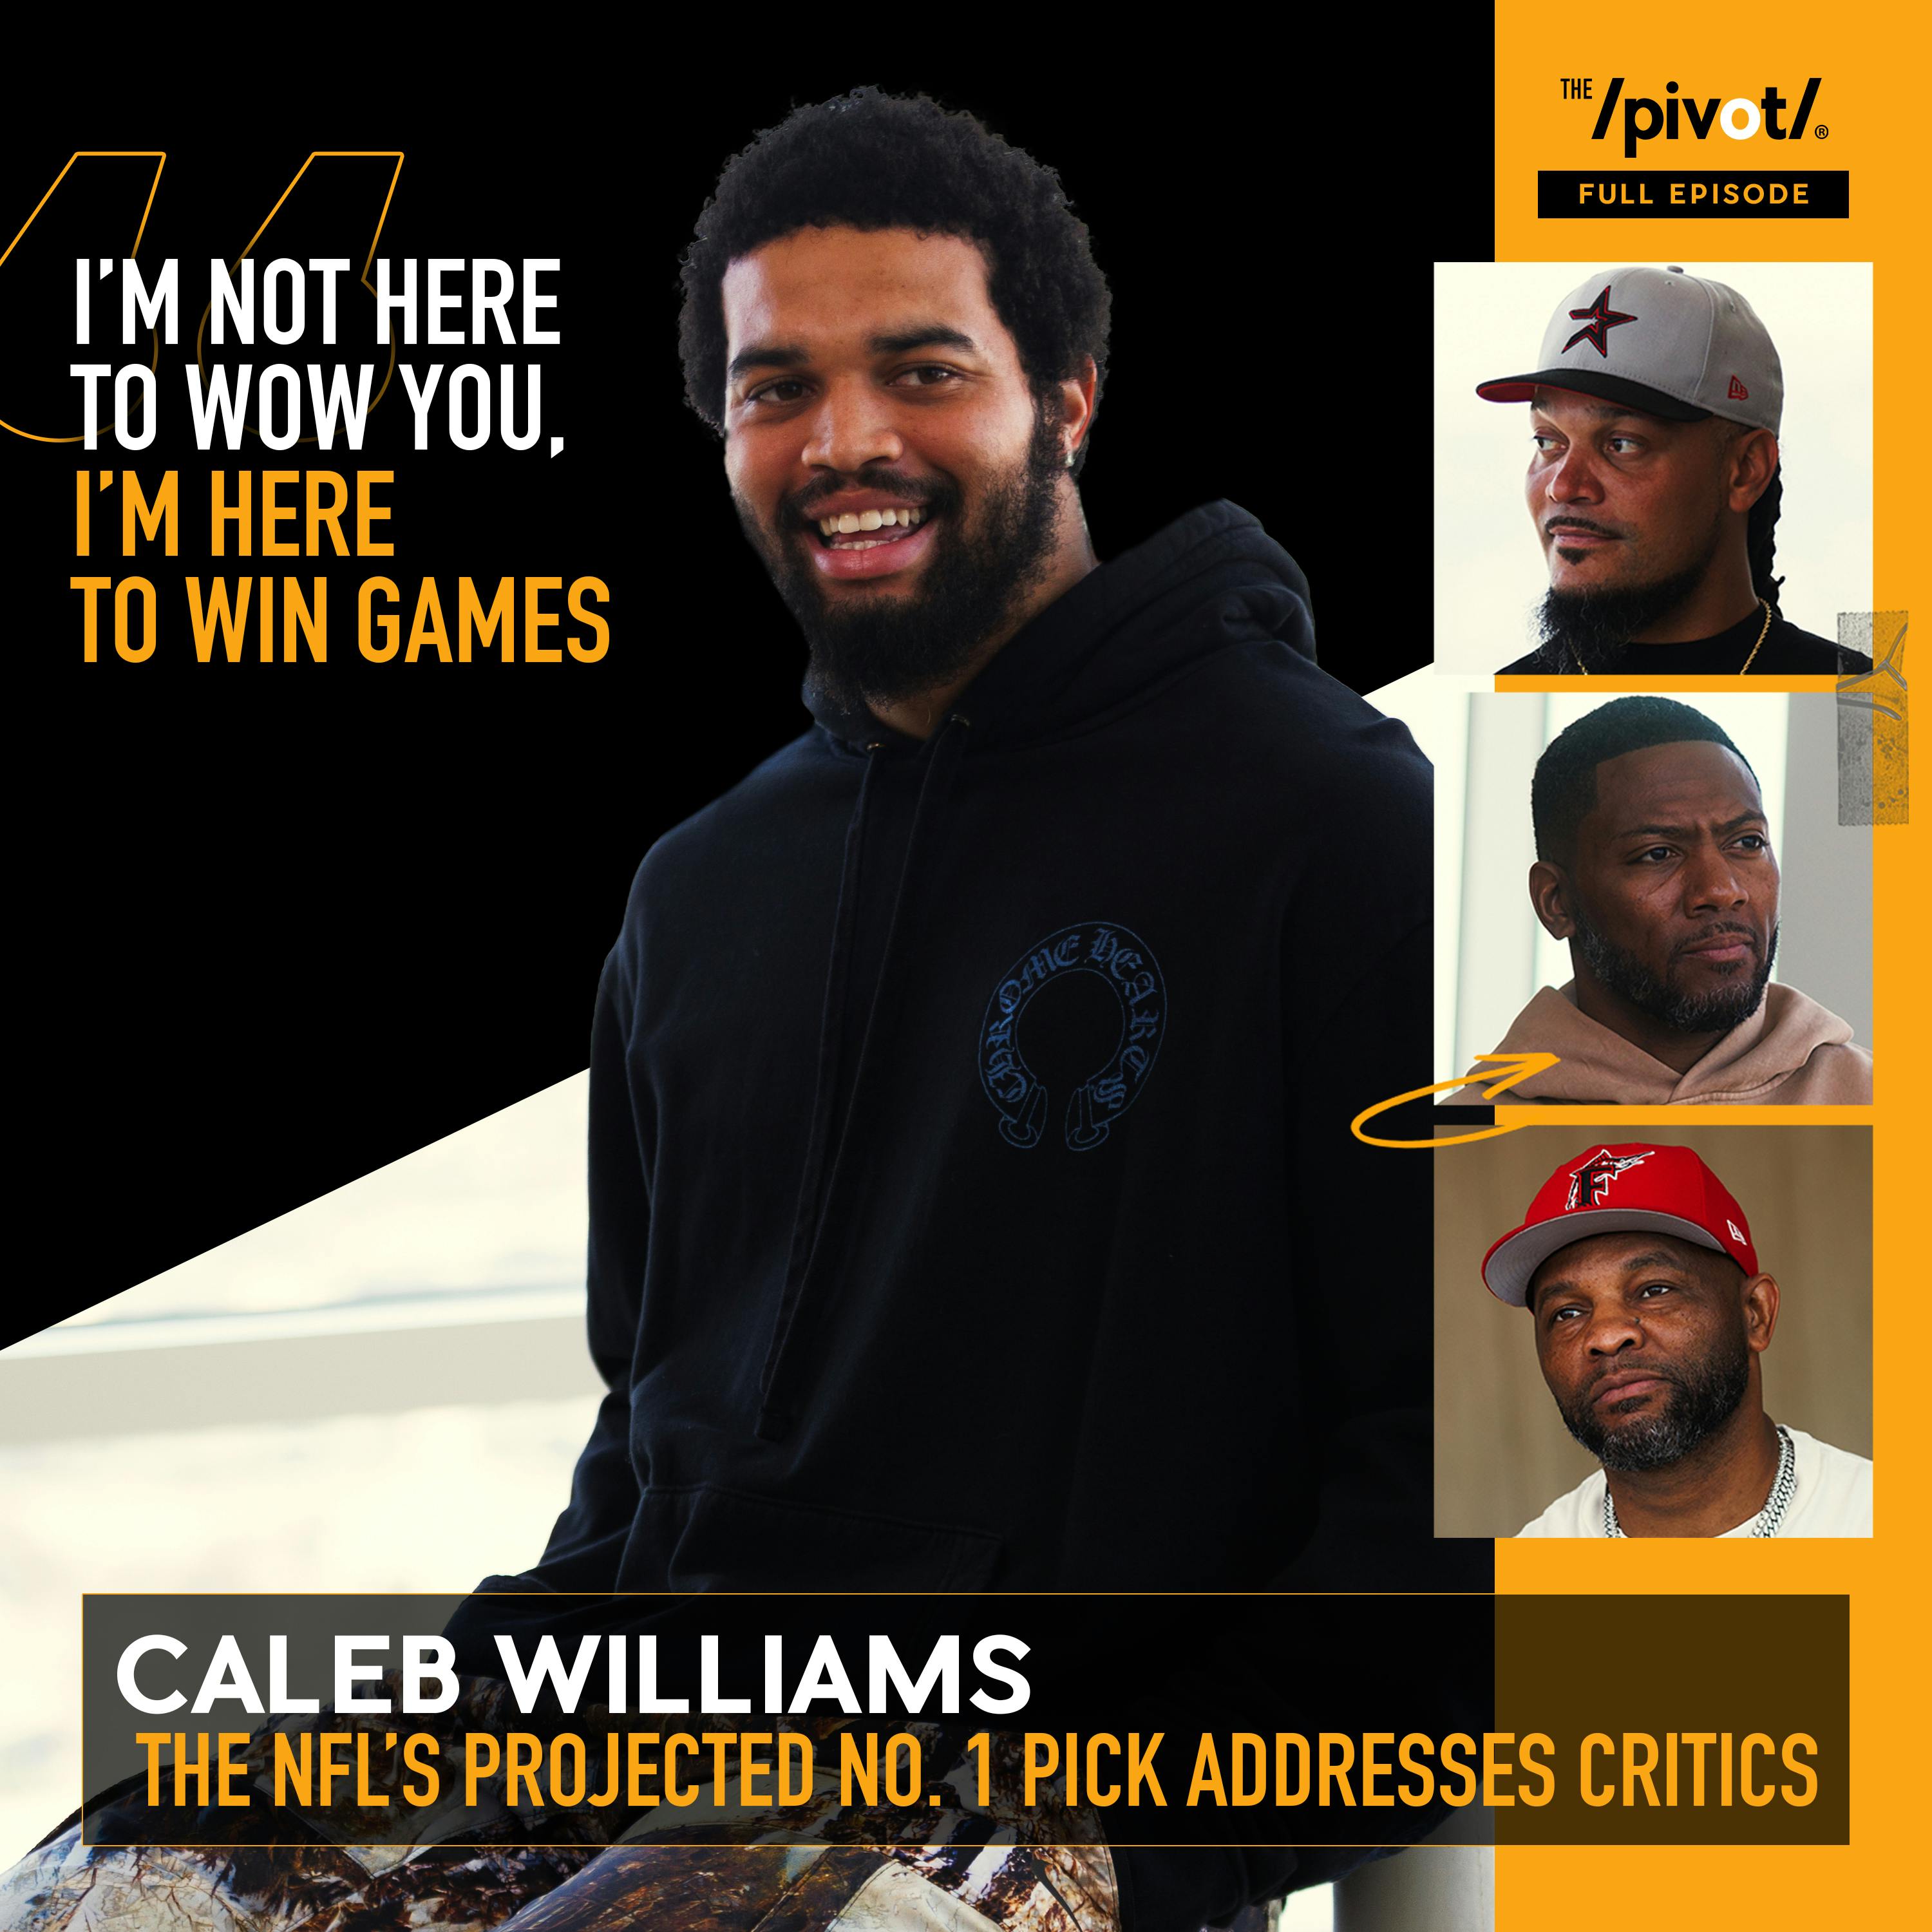 Caleb Williams The NFL’s No. 1 Overall Projected Draft Pick talks his football mindset, winning Championships, dealing with critics, hating disrespect, what he looks forward to in Chicago & being a le